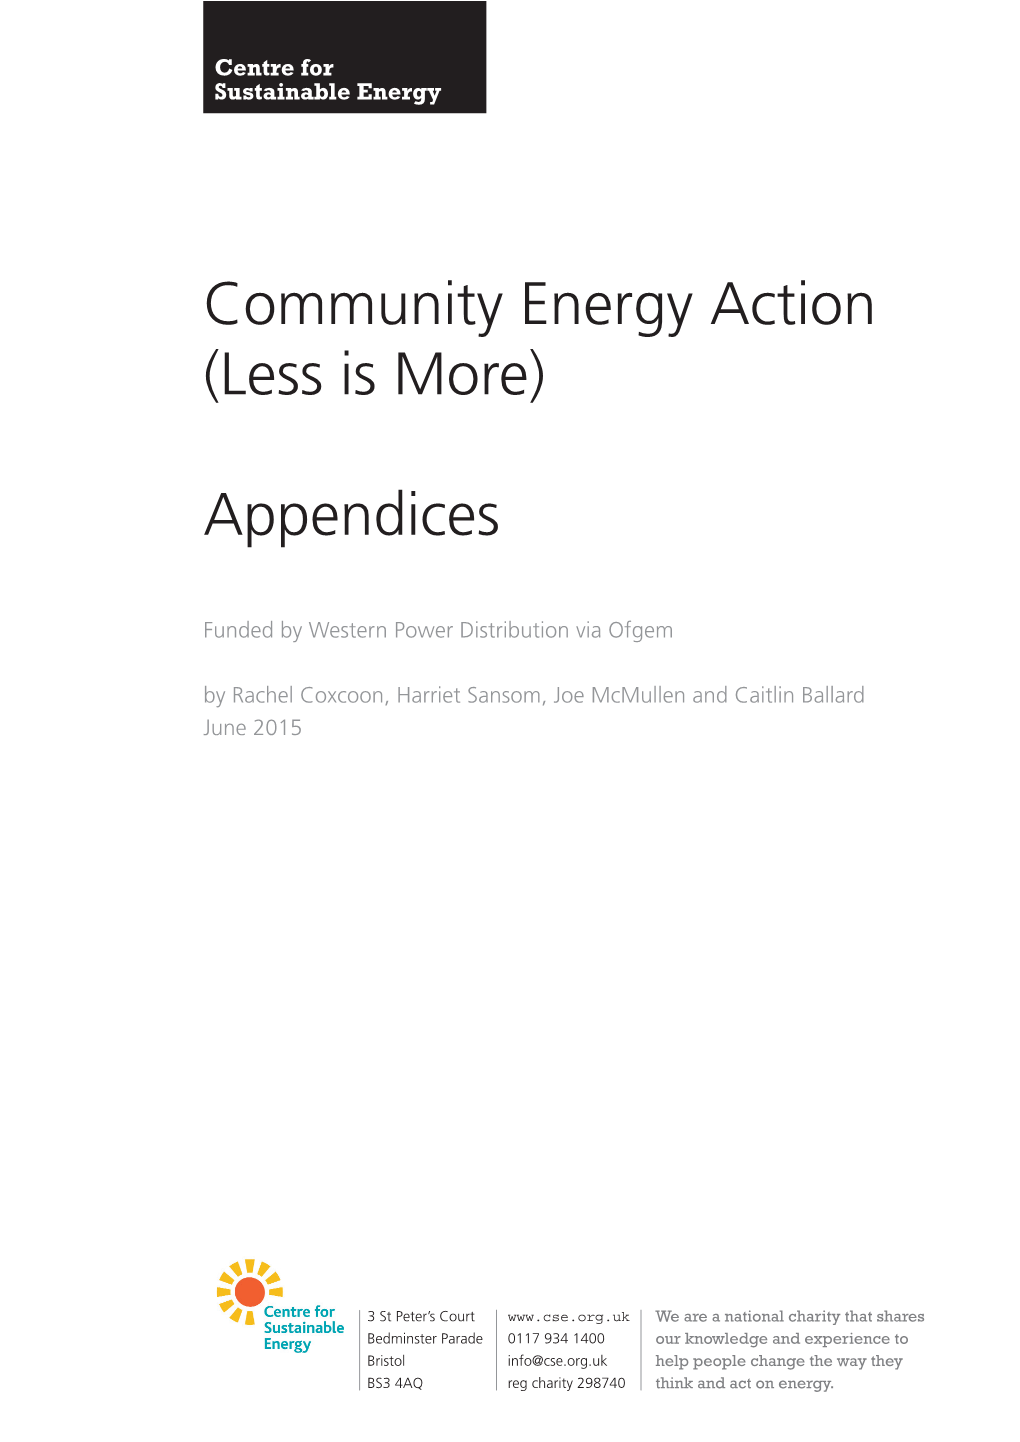 Community Energy Action (Less Is More) Appendices